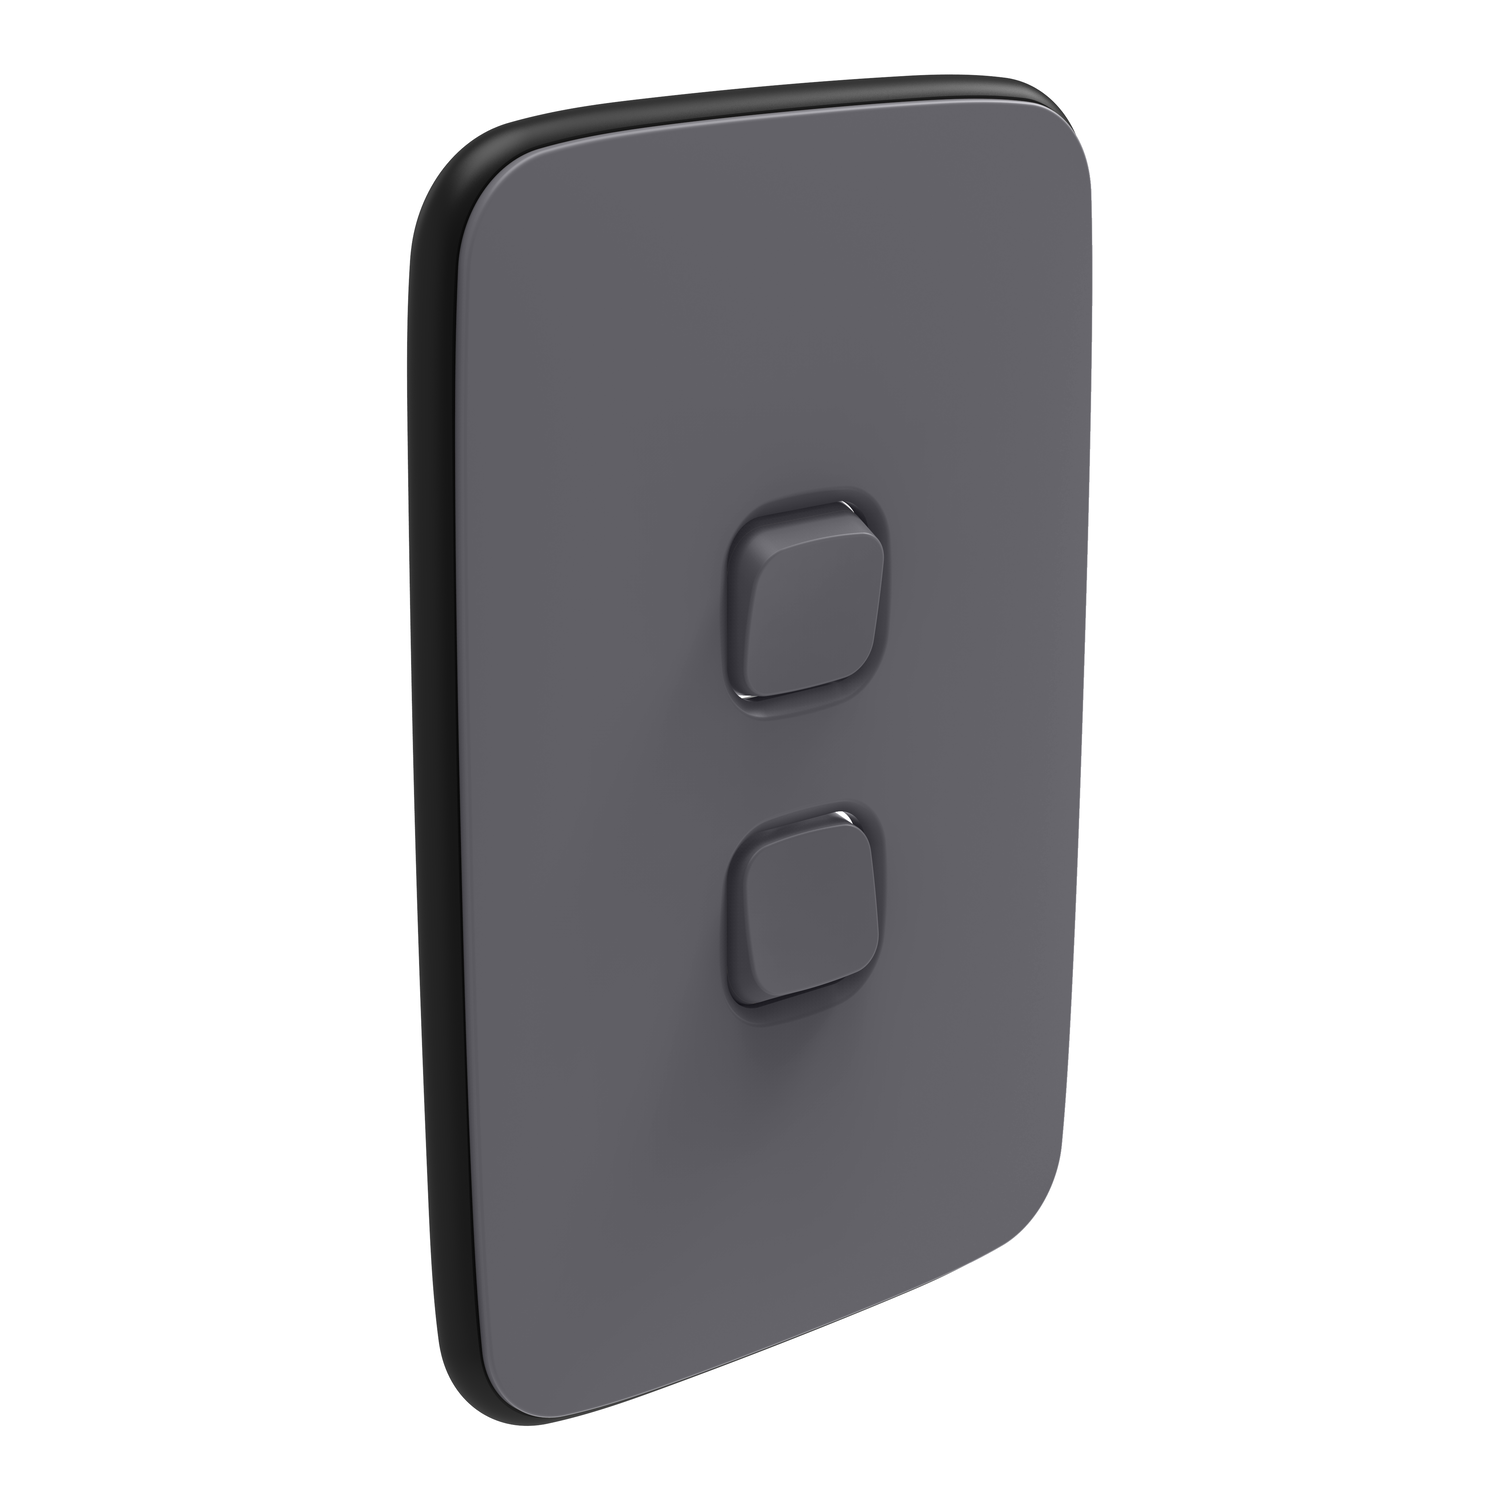 PDL Iconic Essence - Cover Plate Switch 2-Gang - Ash Grey